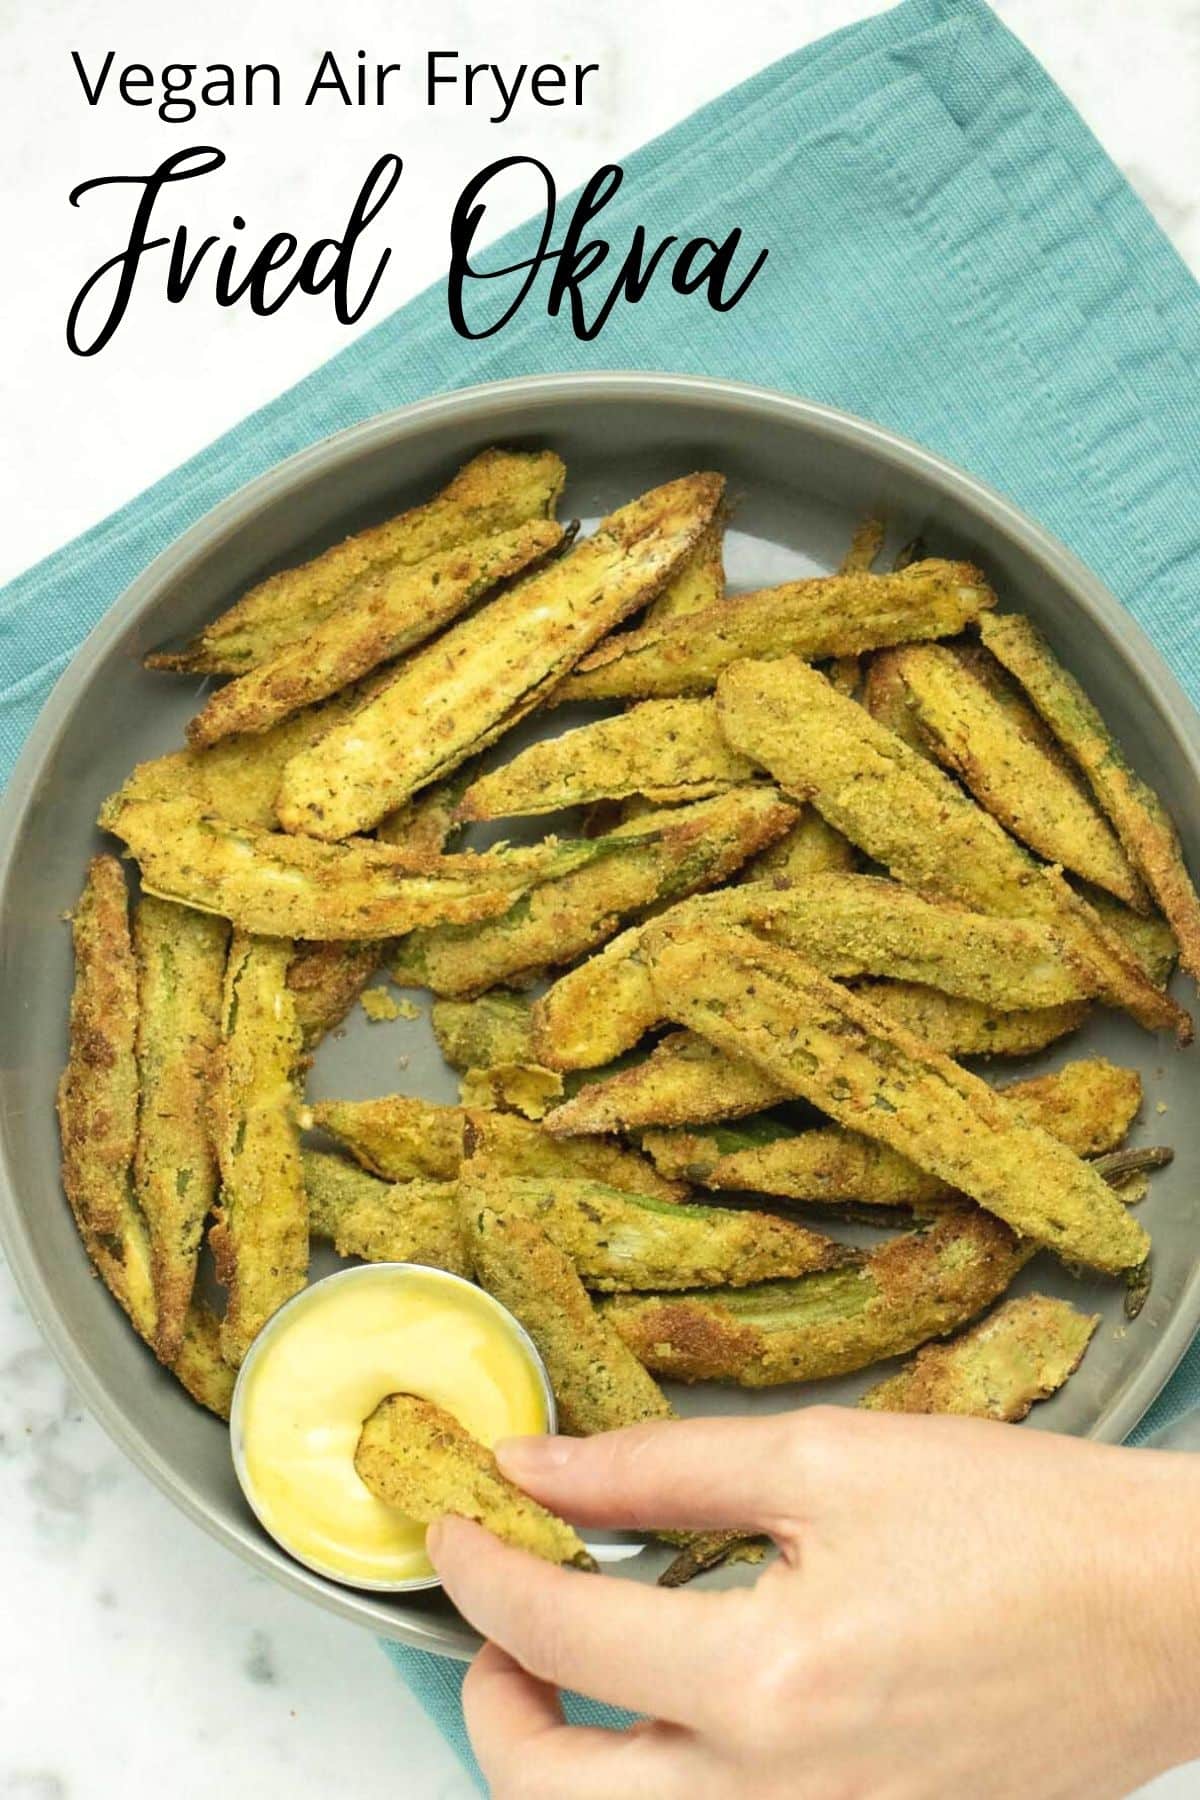 serving platter of air fryer okra, a hand is dipping a piece into a creamy sauce, text overlay